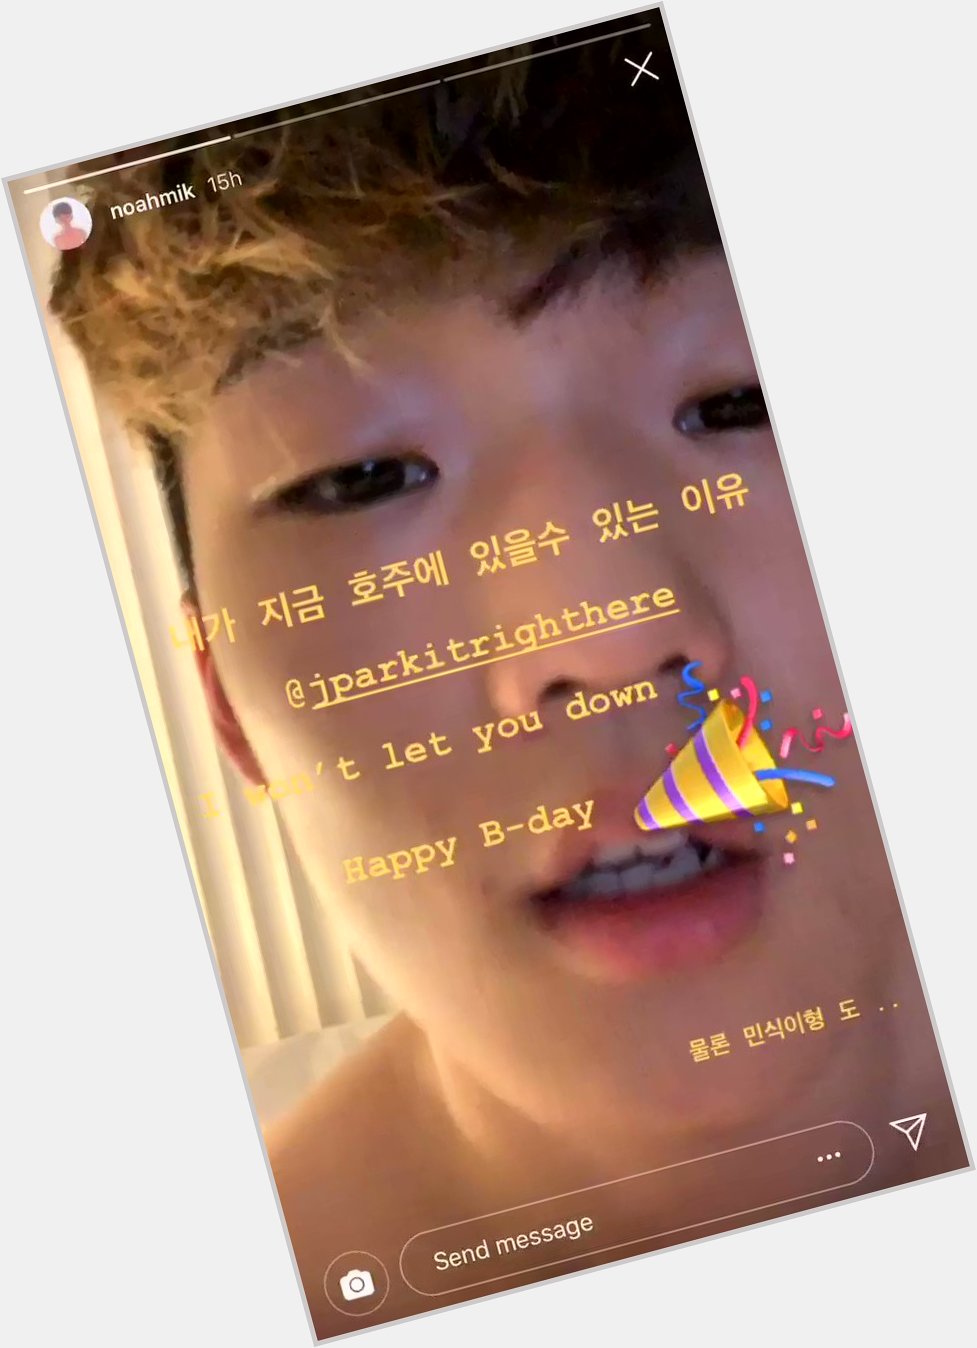 Haon wishing jay park a happy birthday. haon used to want jay park to acknowledge him this is so cute 